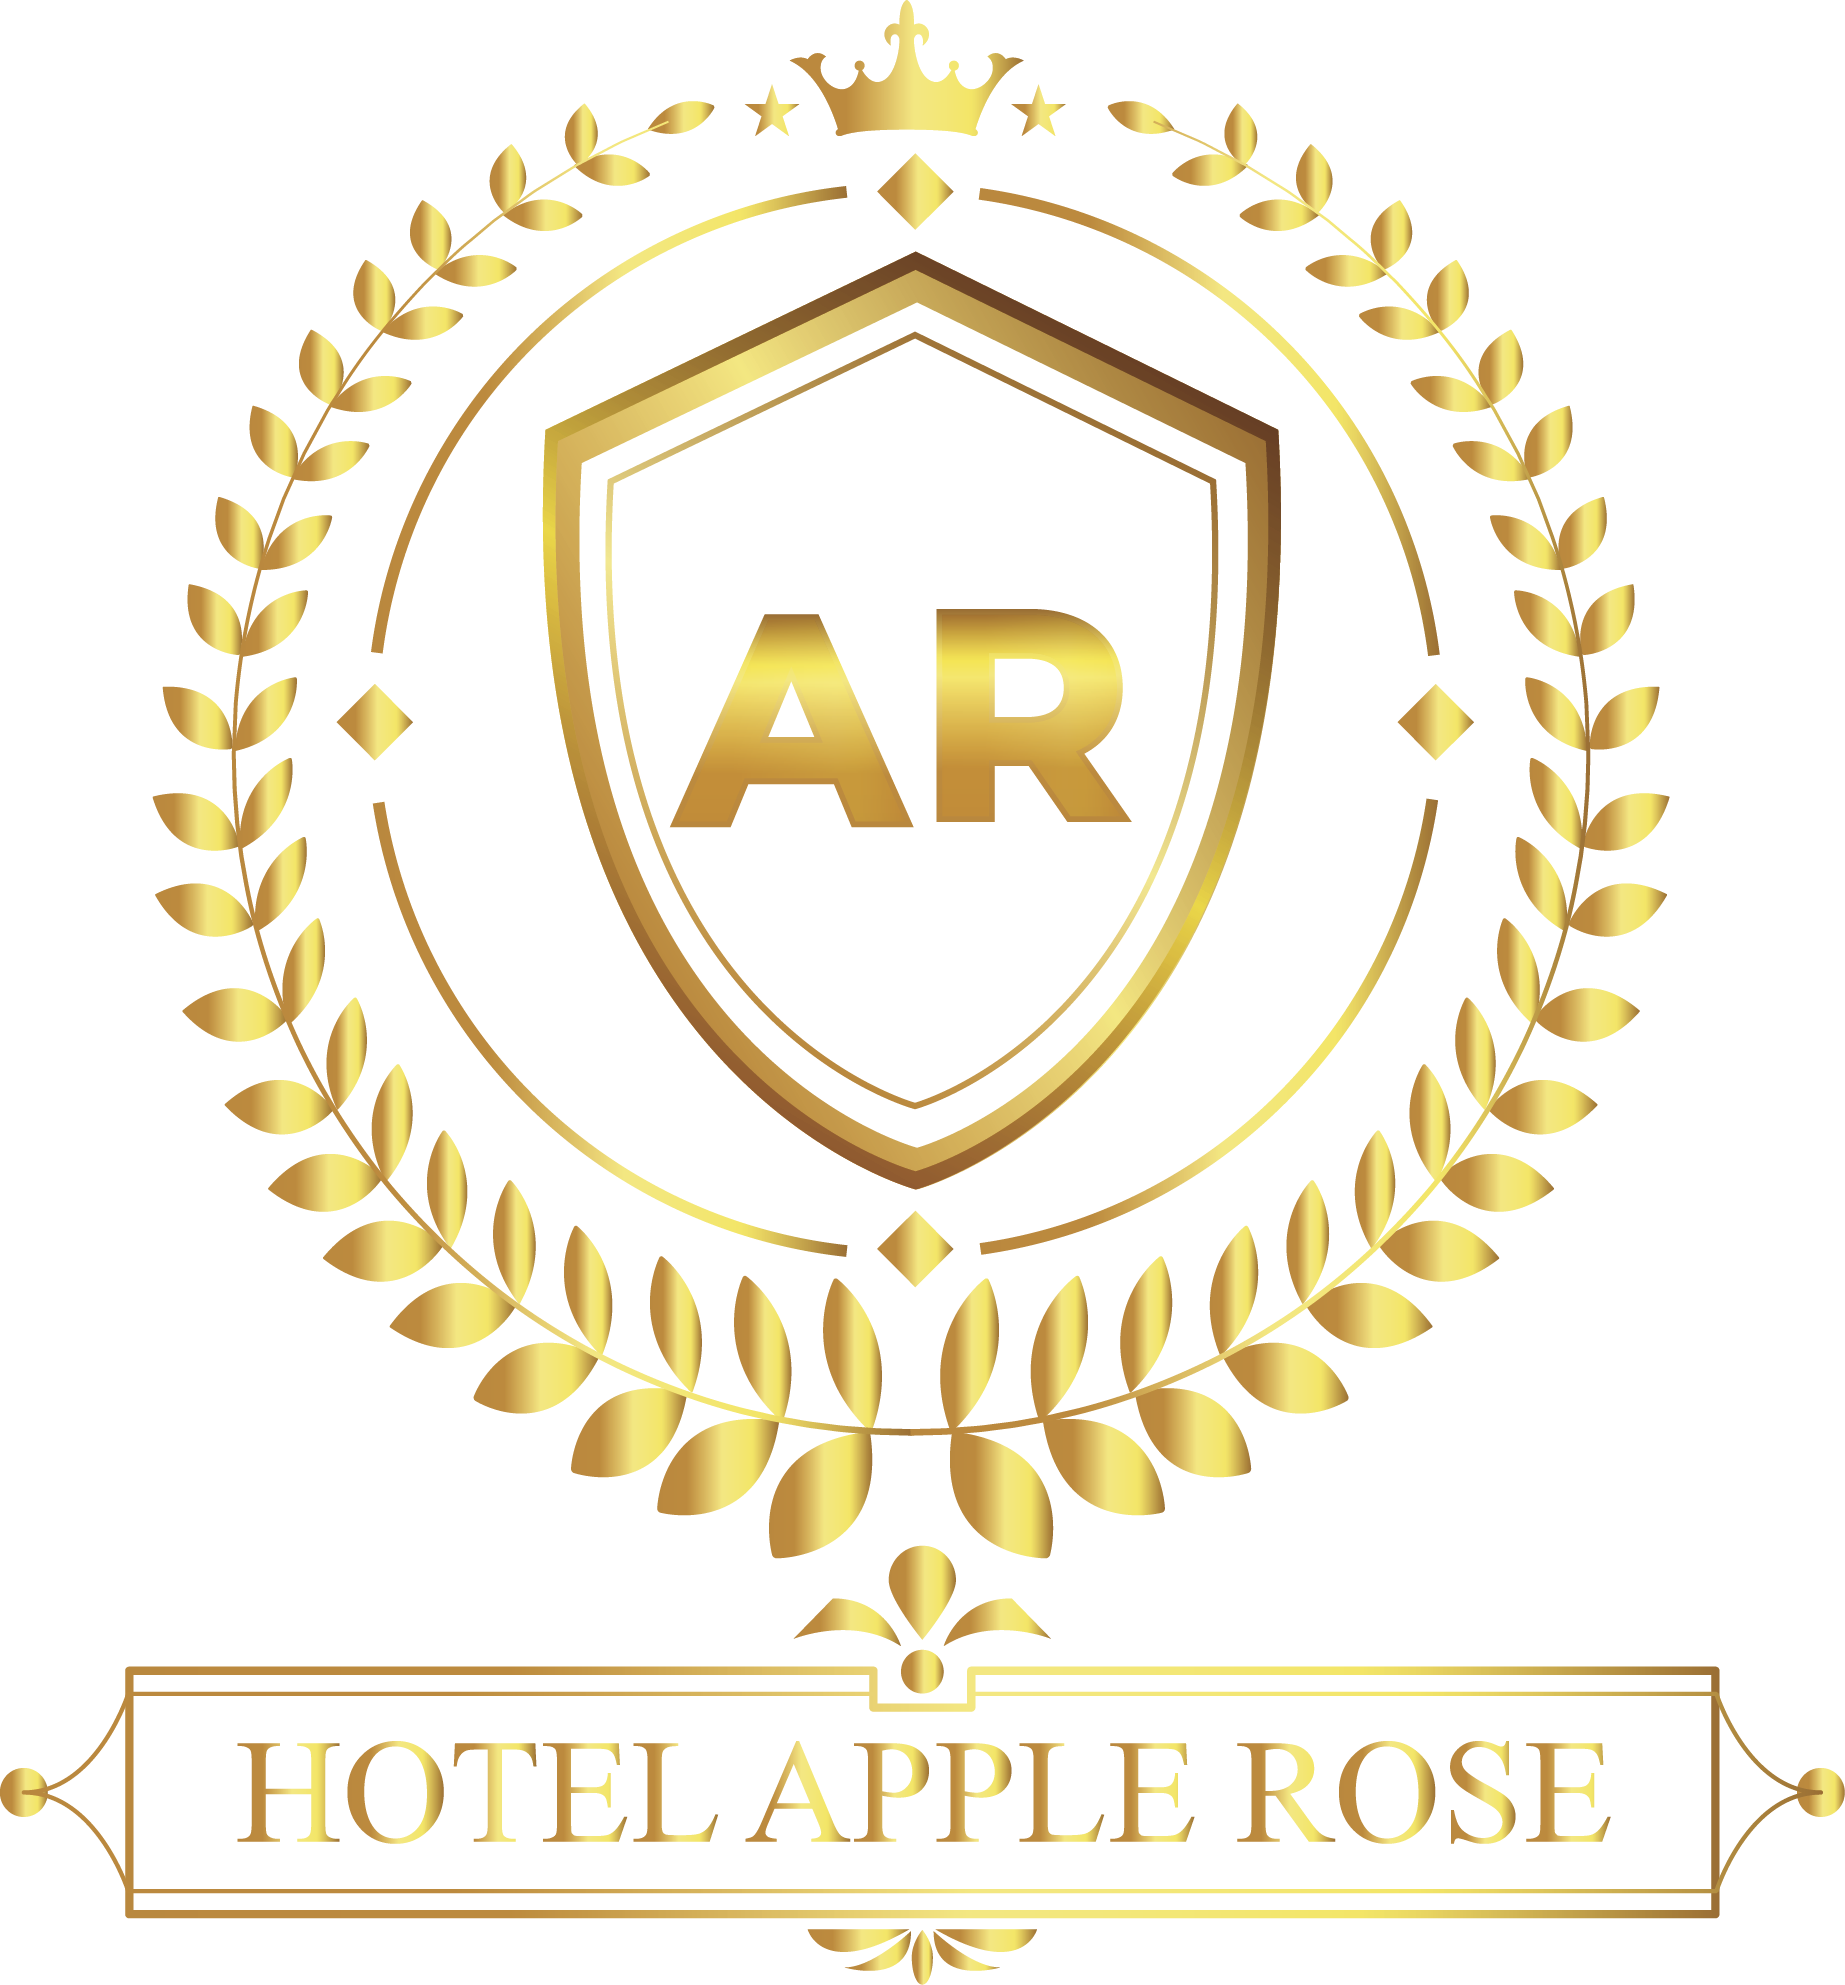 Hotel Apple Rose|Guest House|Accomodation